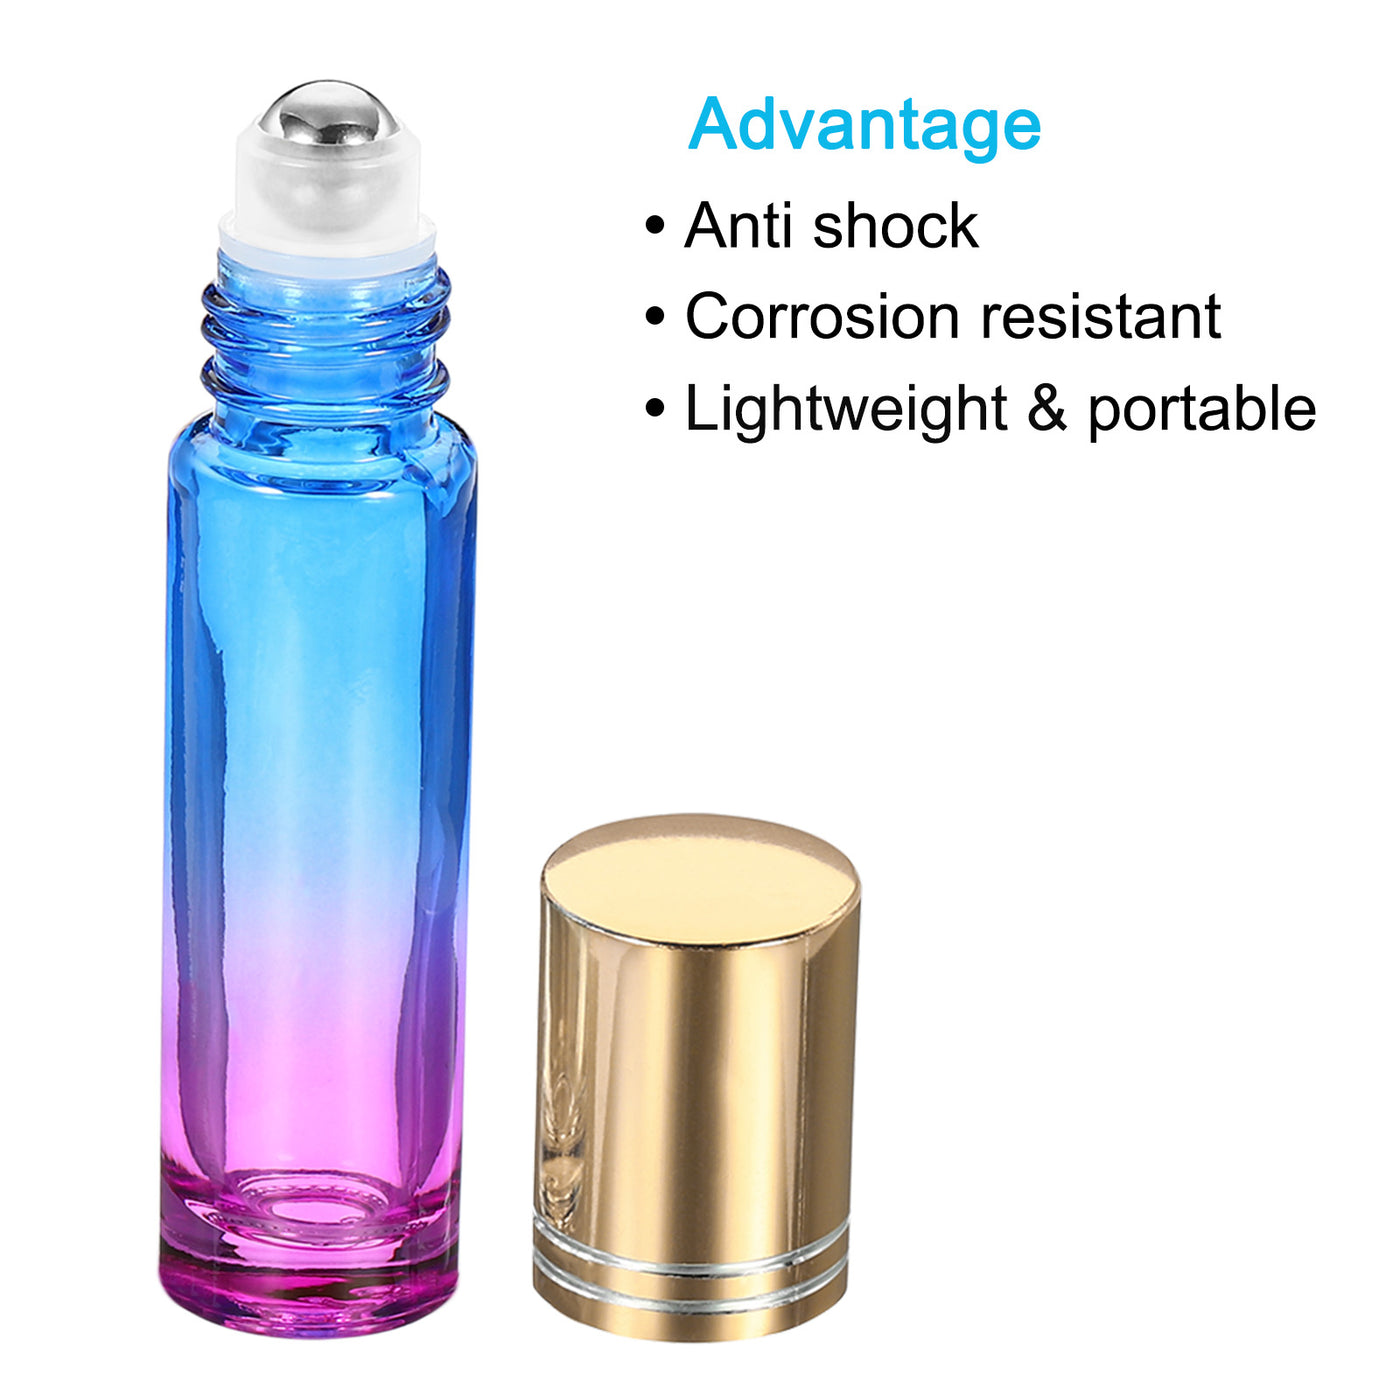 Harfington 10mL Roller Bottles, 2 Pack Glass Essential Oil Roller Balls with Golden Cover Cap Refillable Containers, Blue Purple